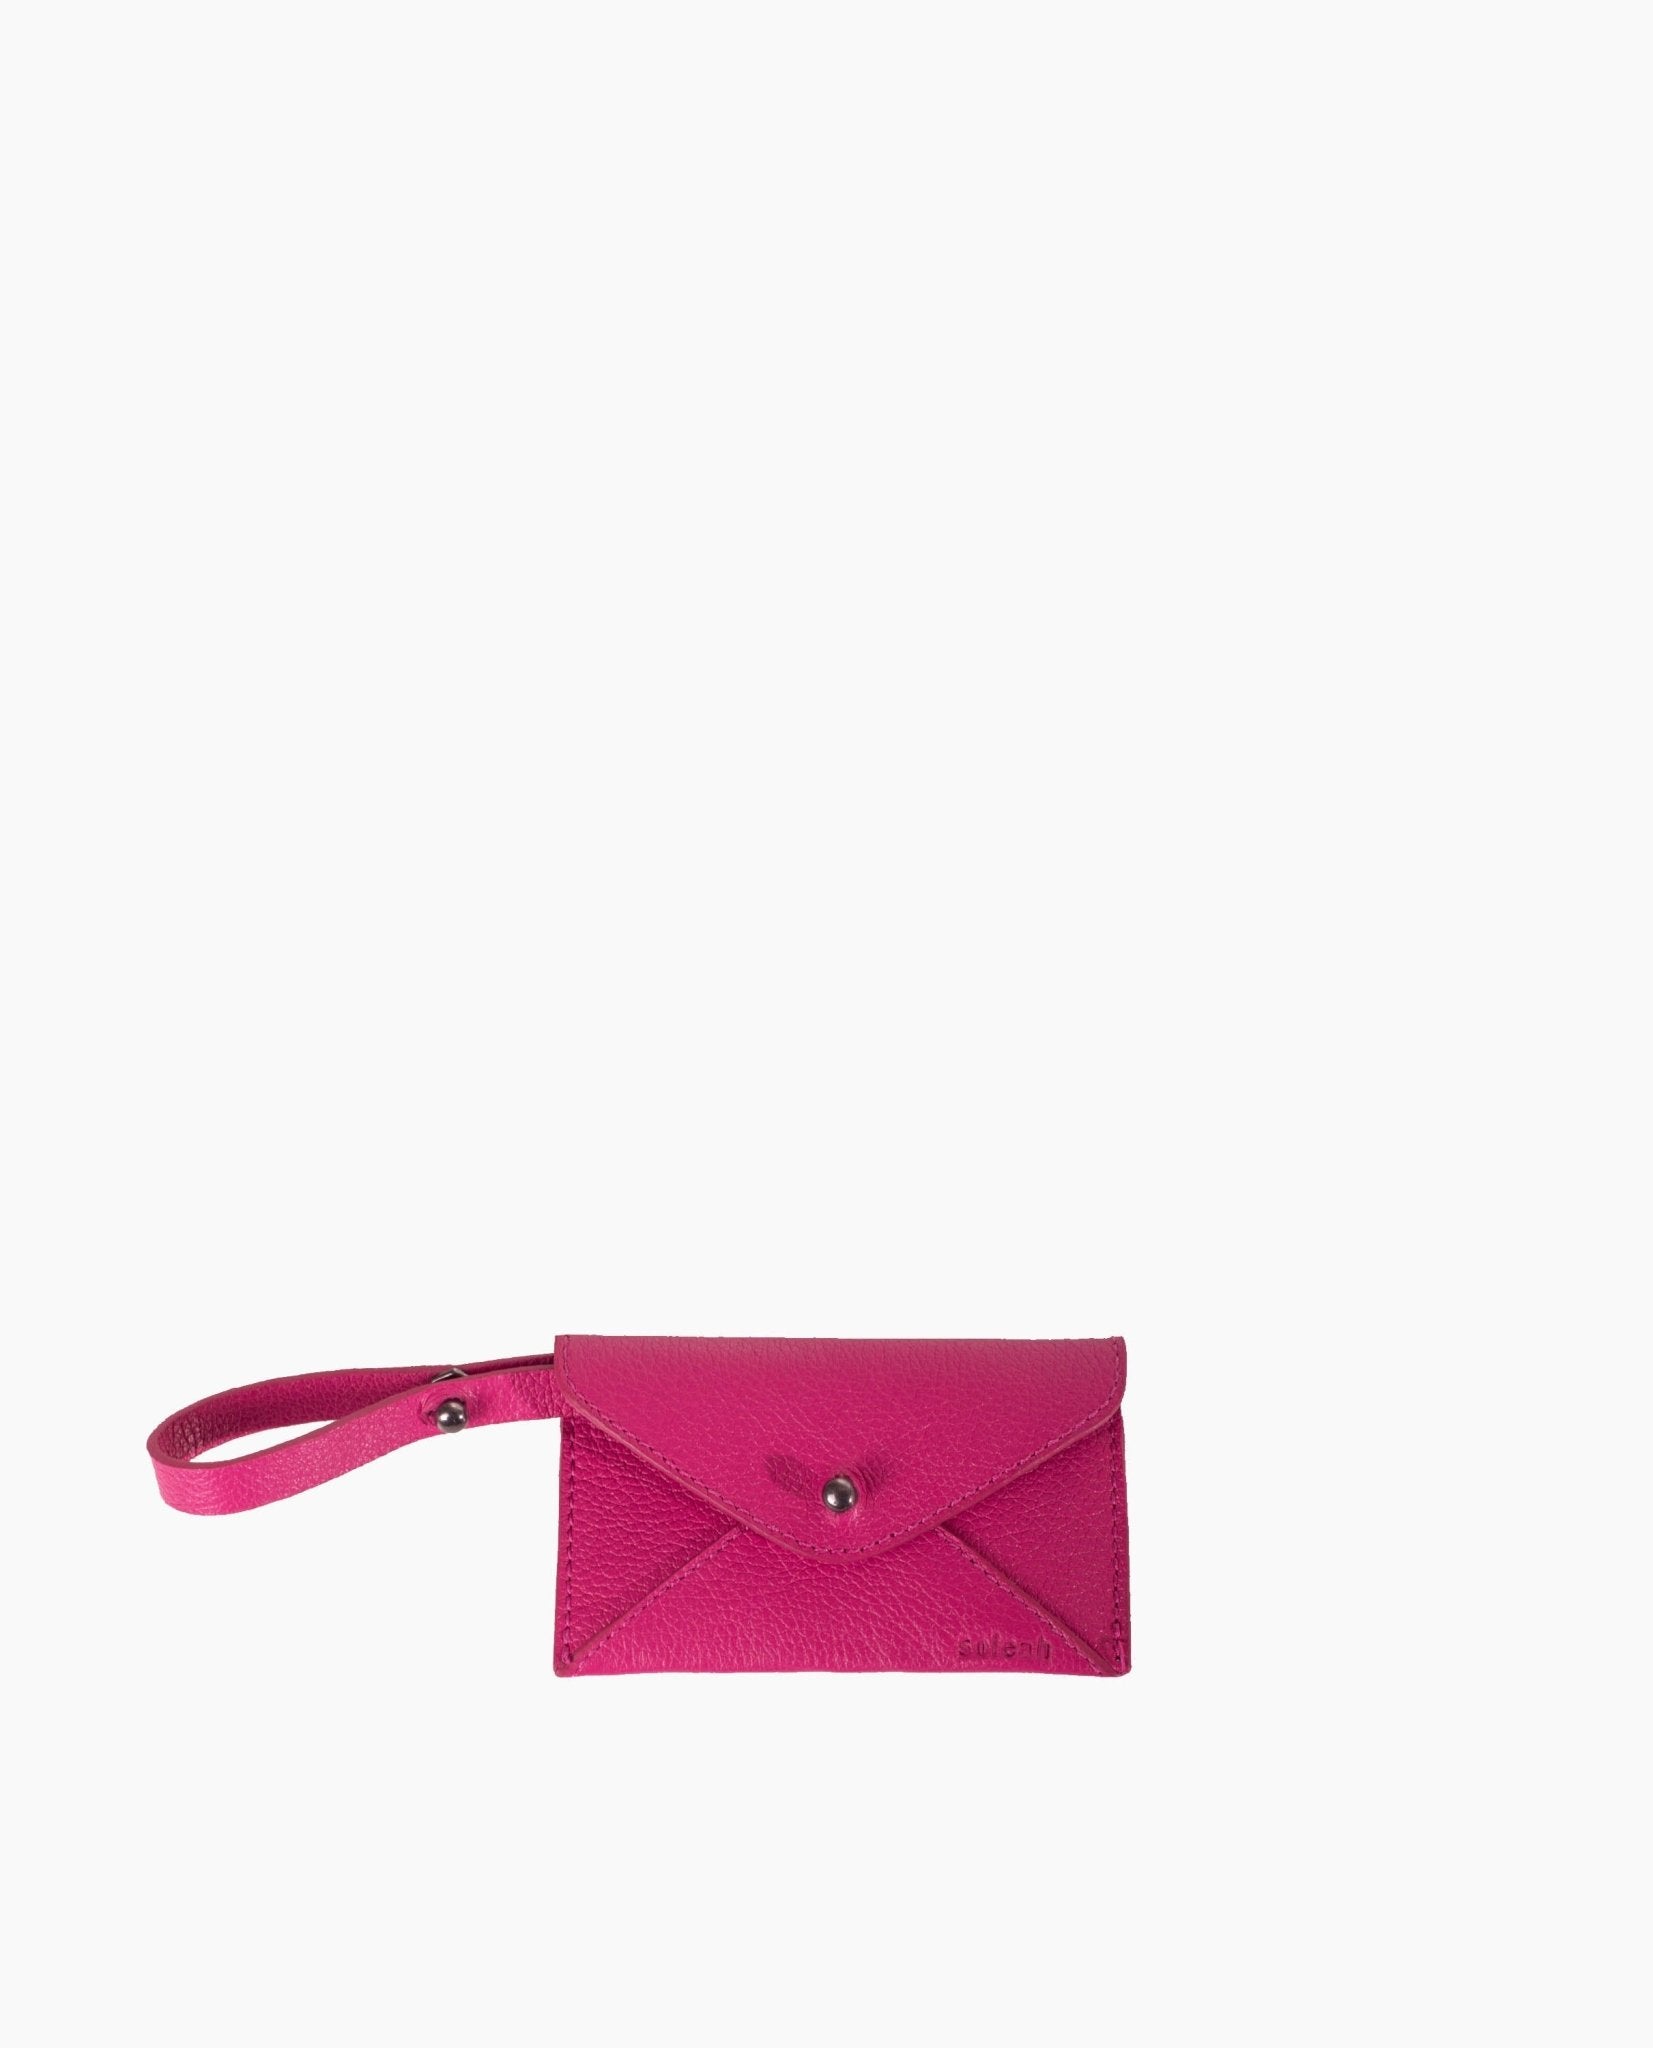 CHAVEIRO CHARM ENVELOPE ROSA PINK LADY | Soleah